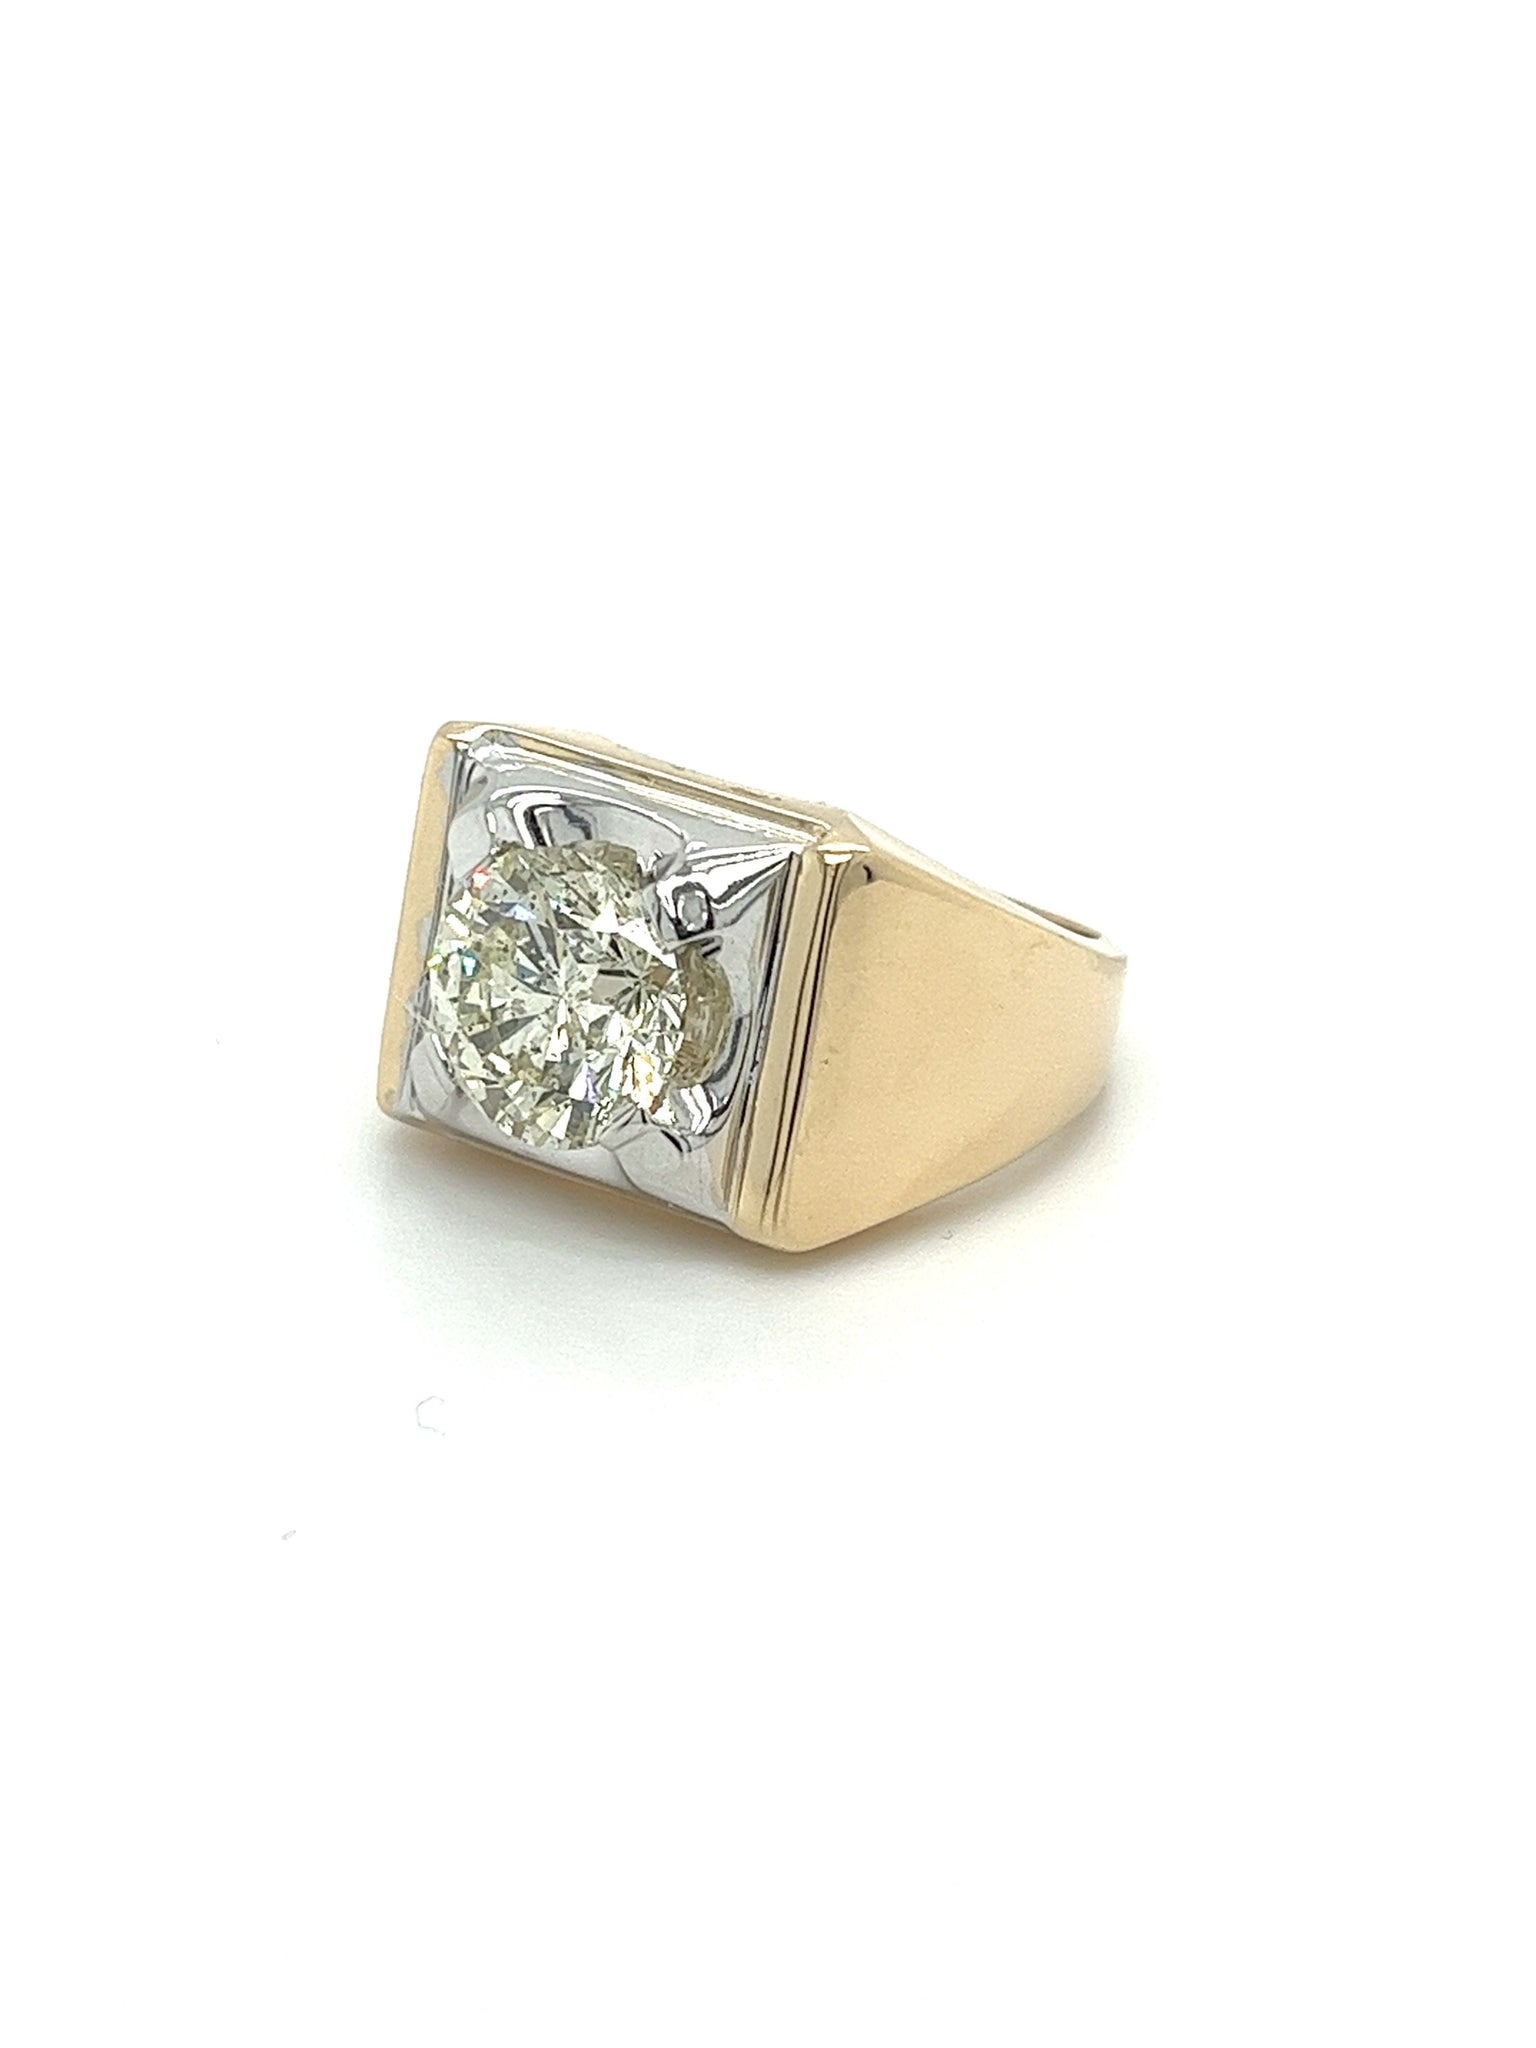 3 Carat Round Cut Natural Diamond Solitaire Mens Ring in 14K Solid Gold